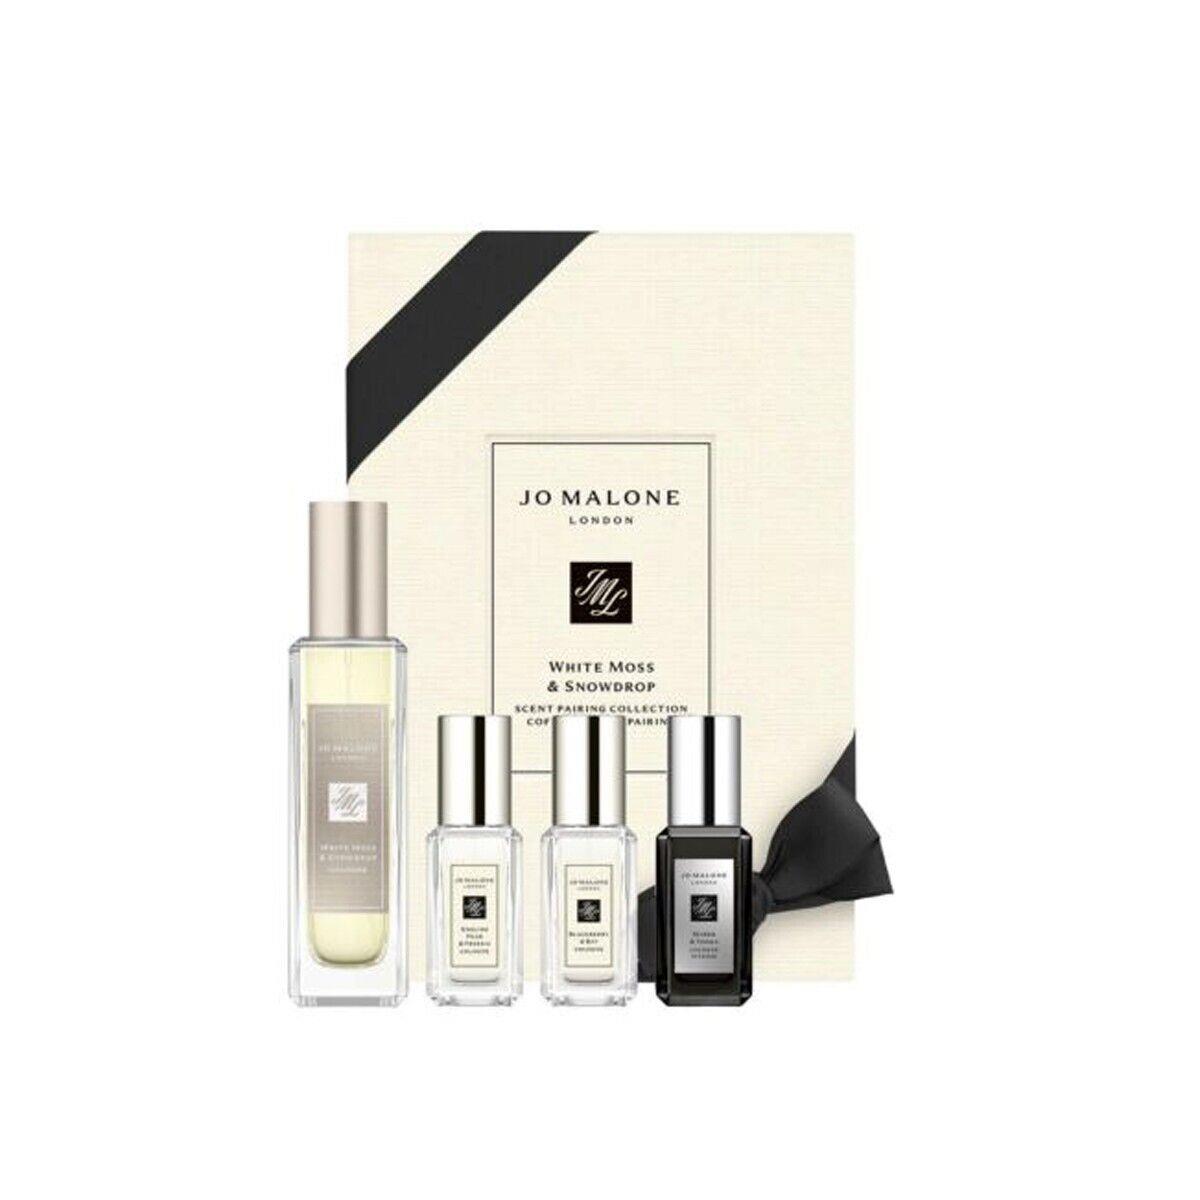 Jo Malone White Moss Snowdrop Scent Pairing Collection Set